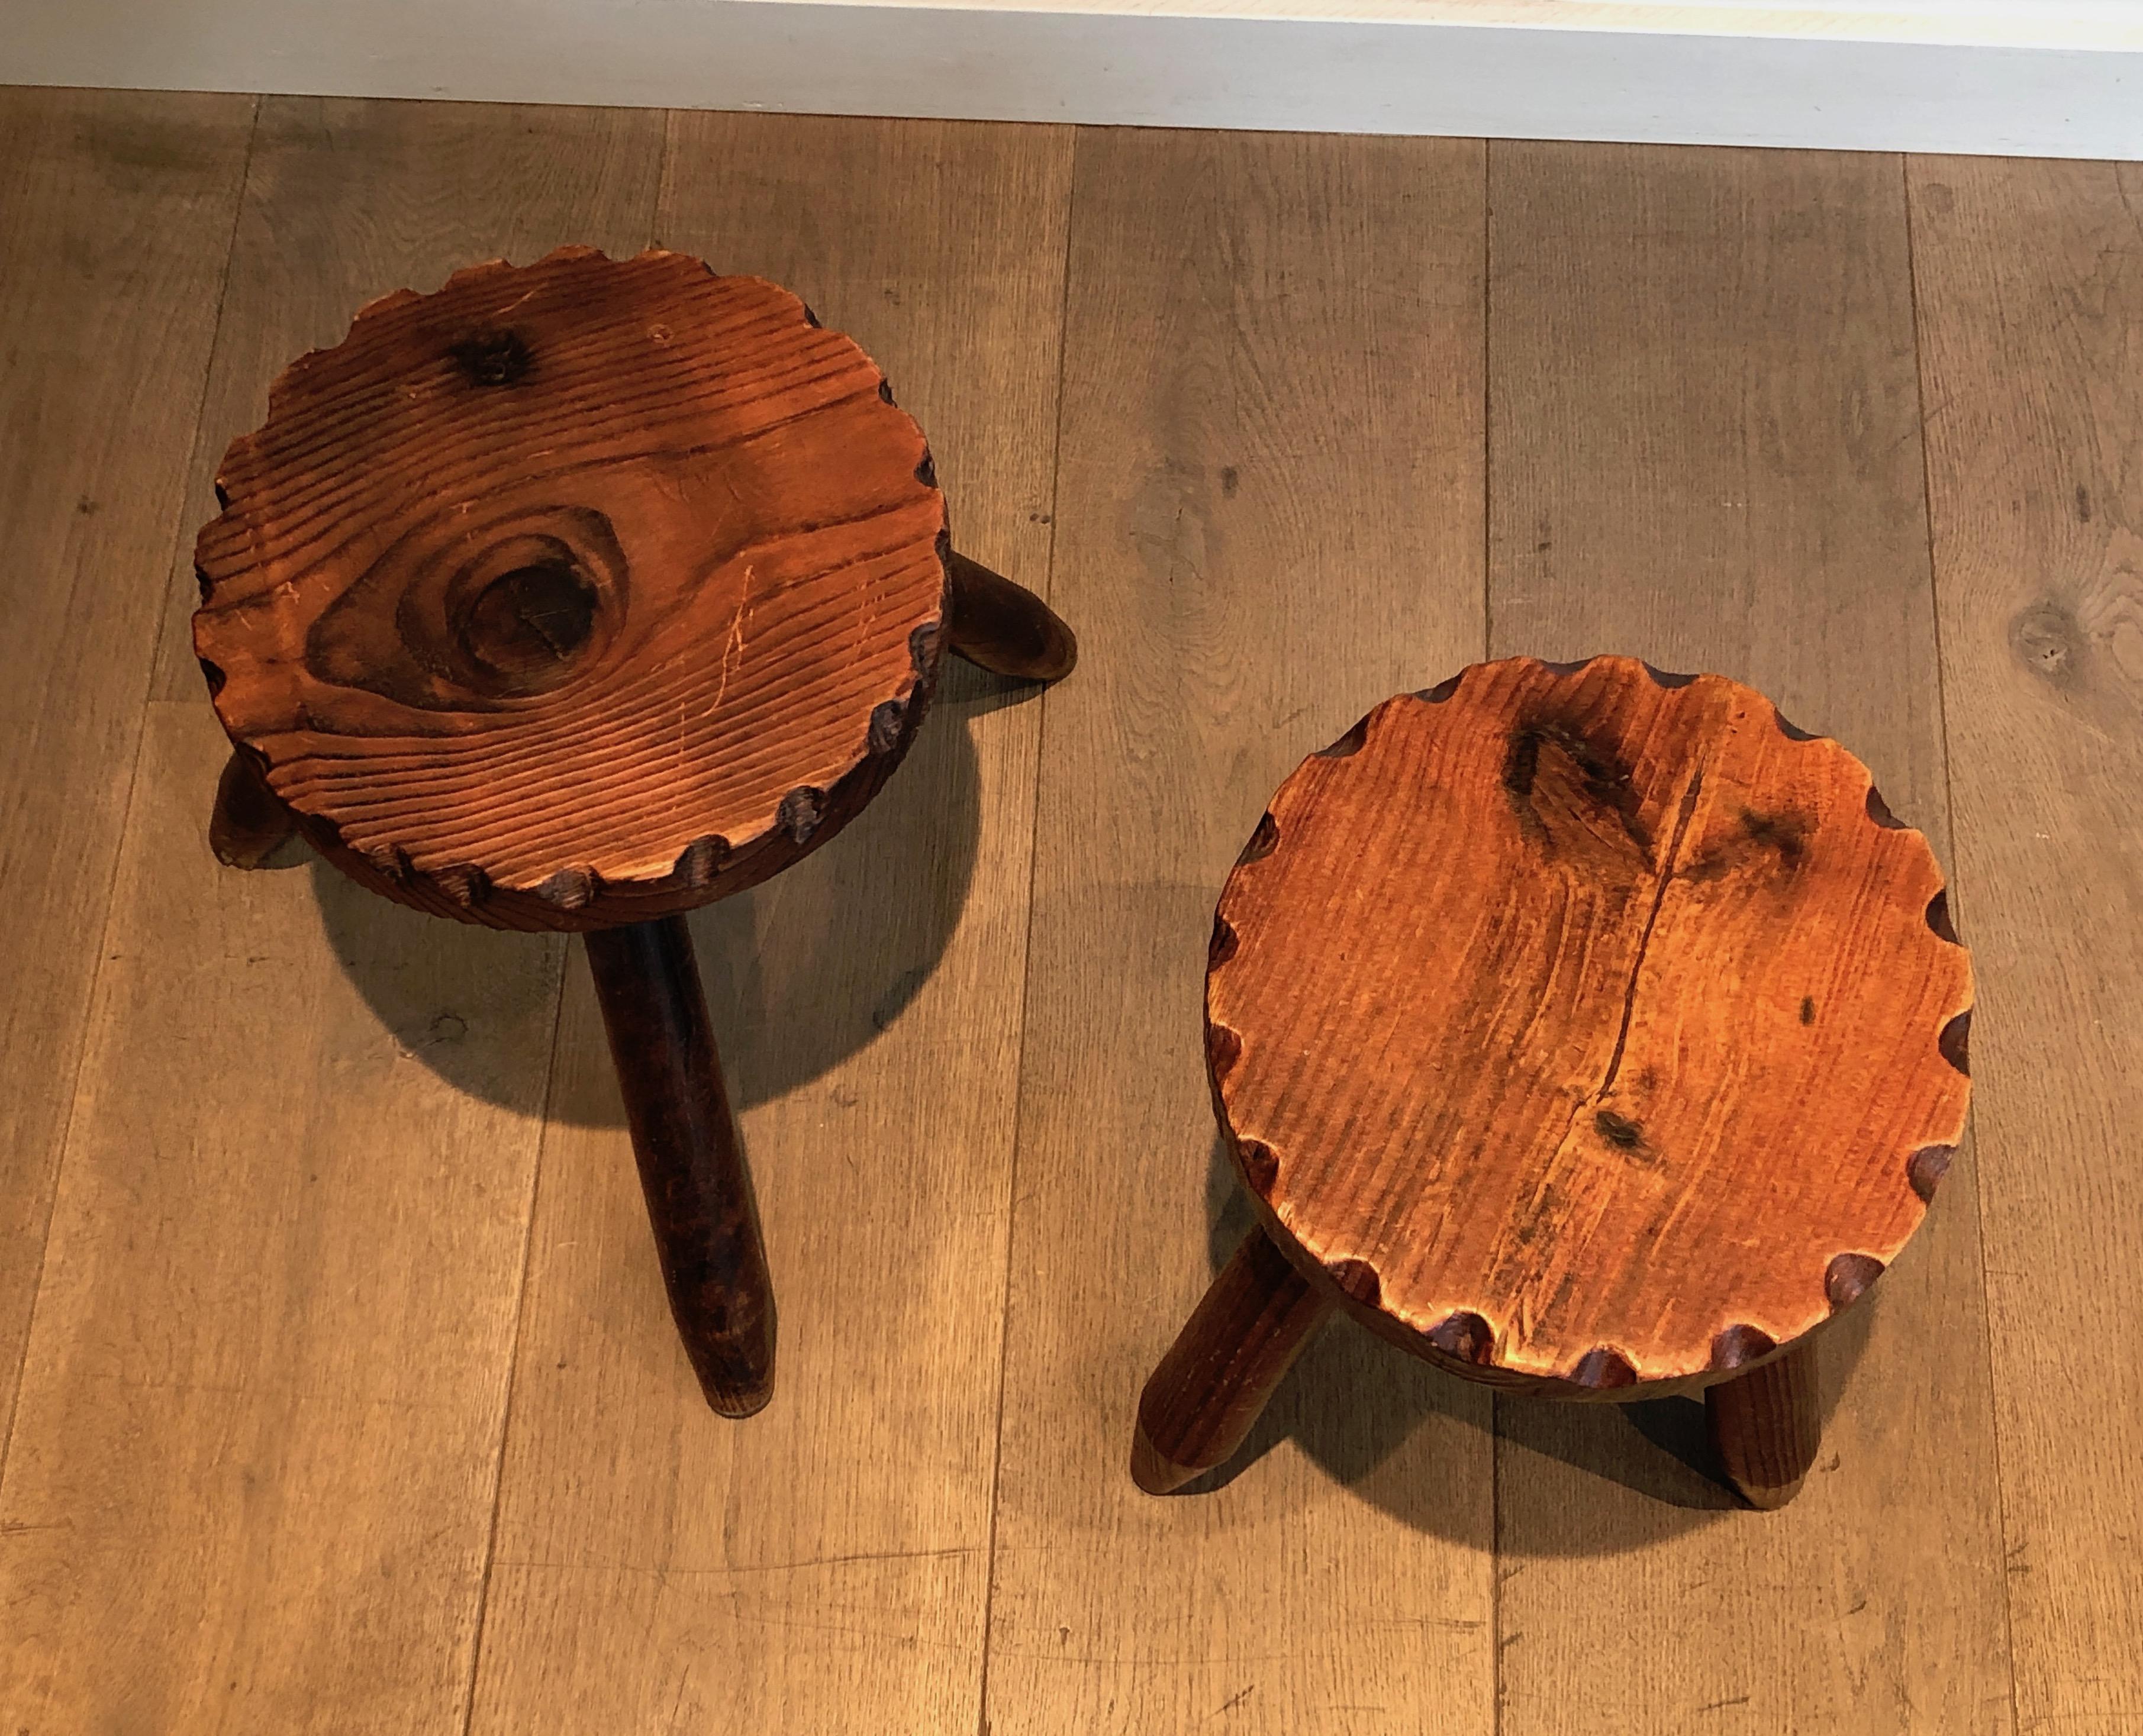 Mid-20th Century Pair of Pine Brutalist Stools, French Work, circa 1950 For Sale